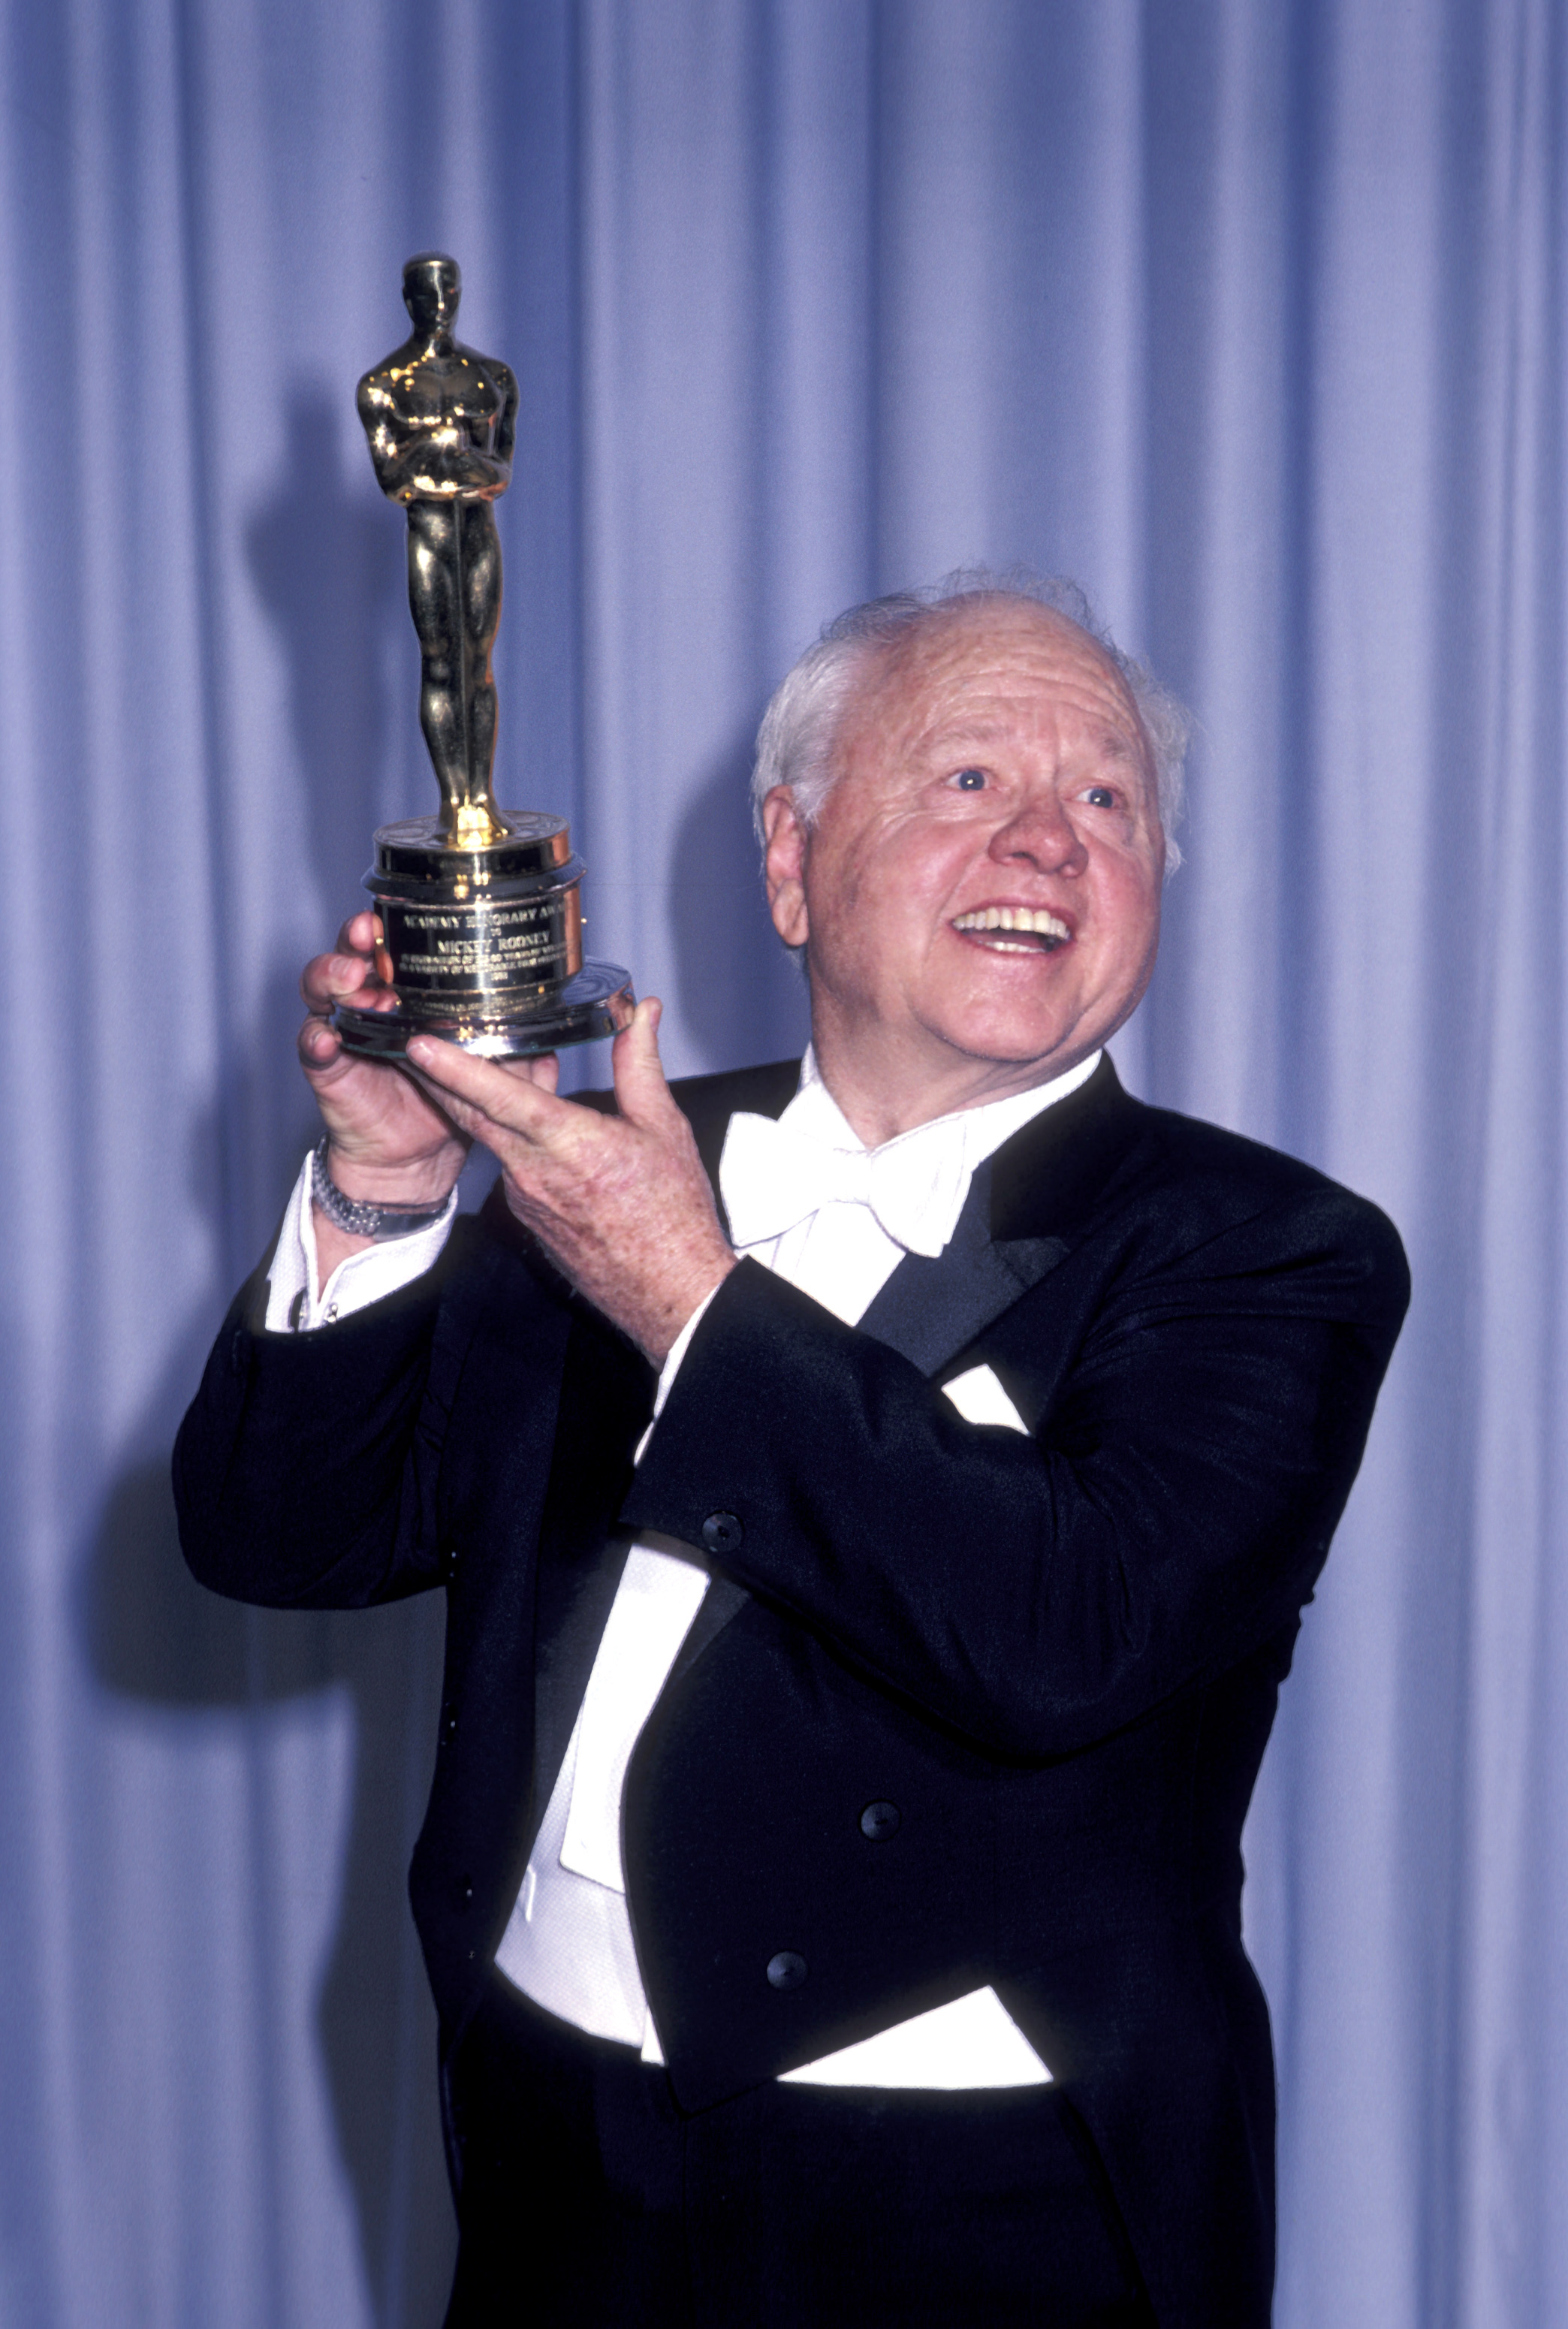 Mickey Rooney received an Honorary Oscar in 1983 "in recognition of his 50 years of versatility in a variety of memorable film performances." (Ron Galella&mdash;WireImage/Getty Images)